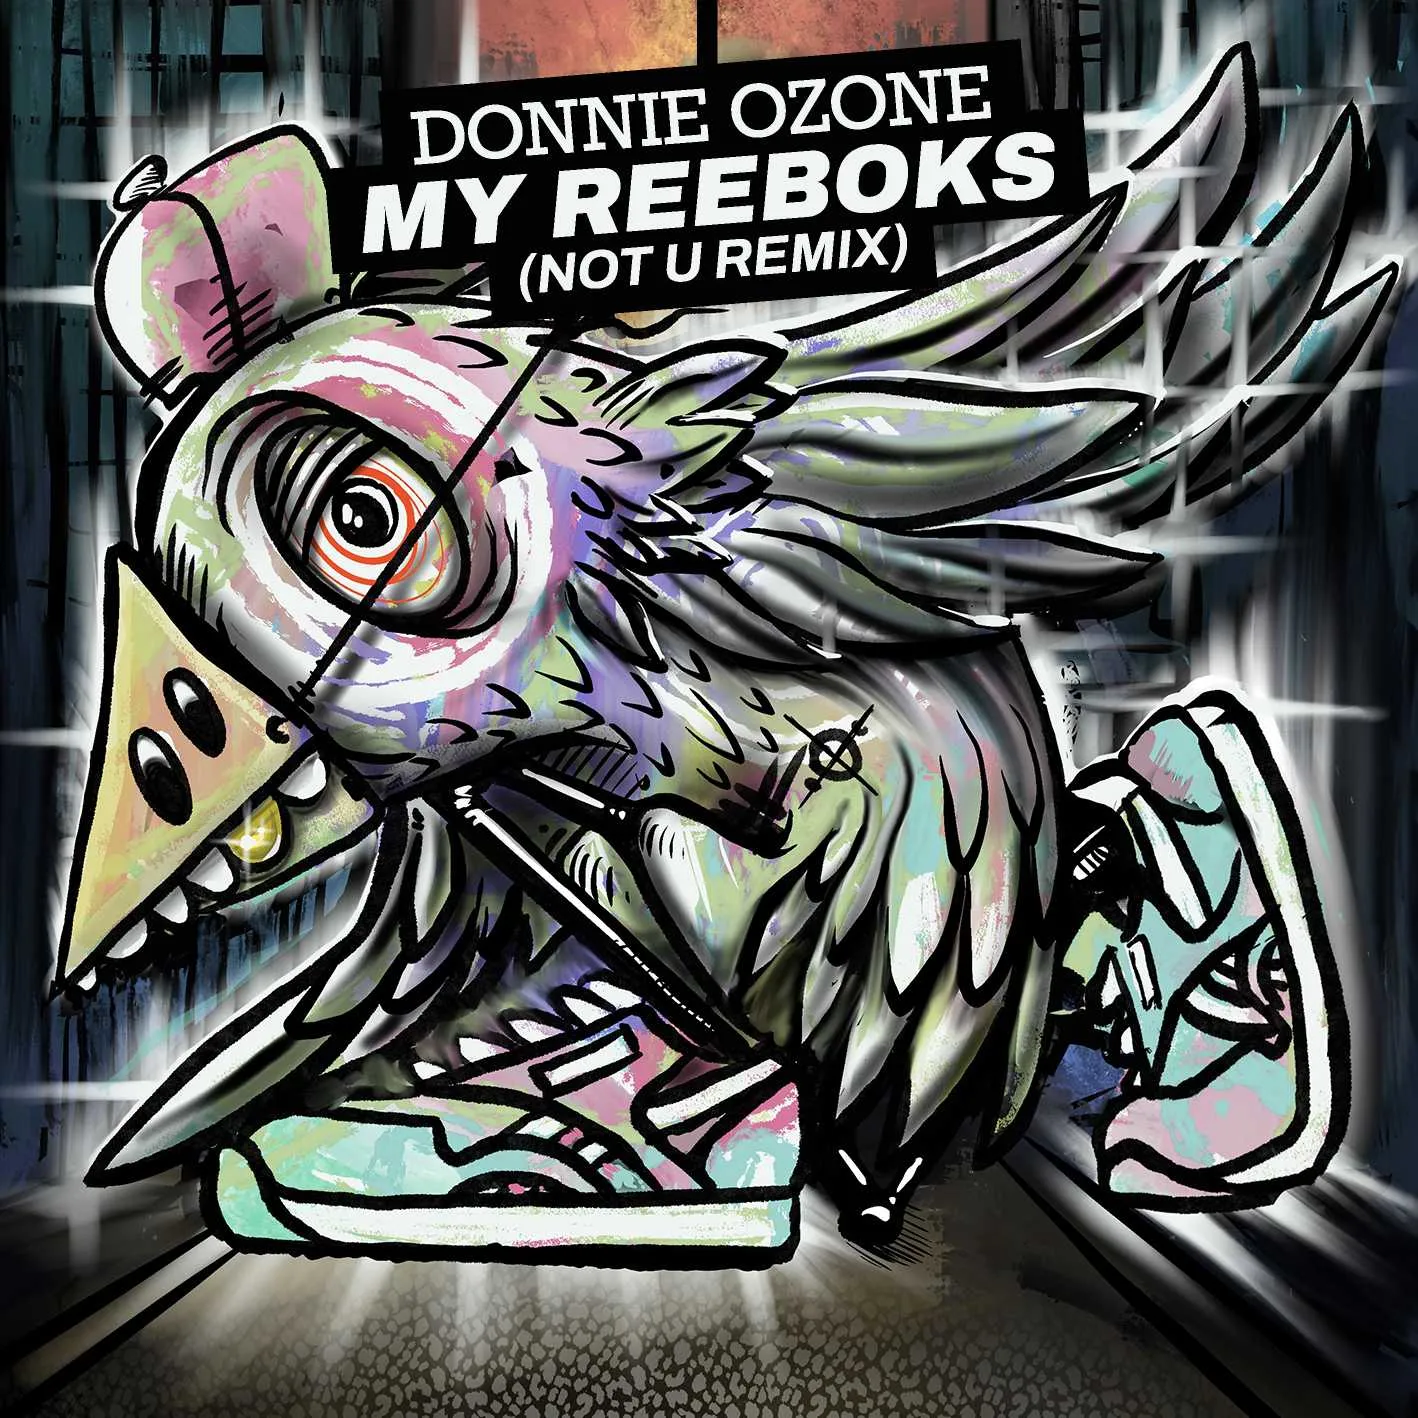 Album cover for “My Reeboks (Not U Remix)” by Donnie Ozone